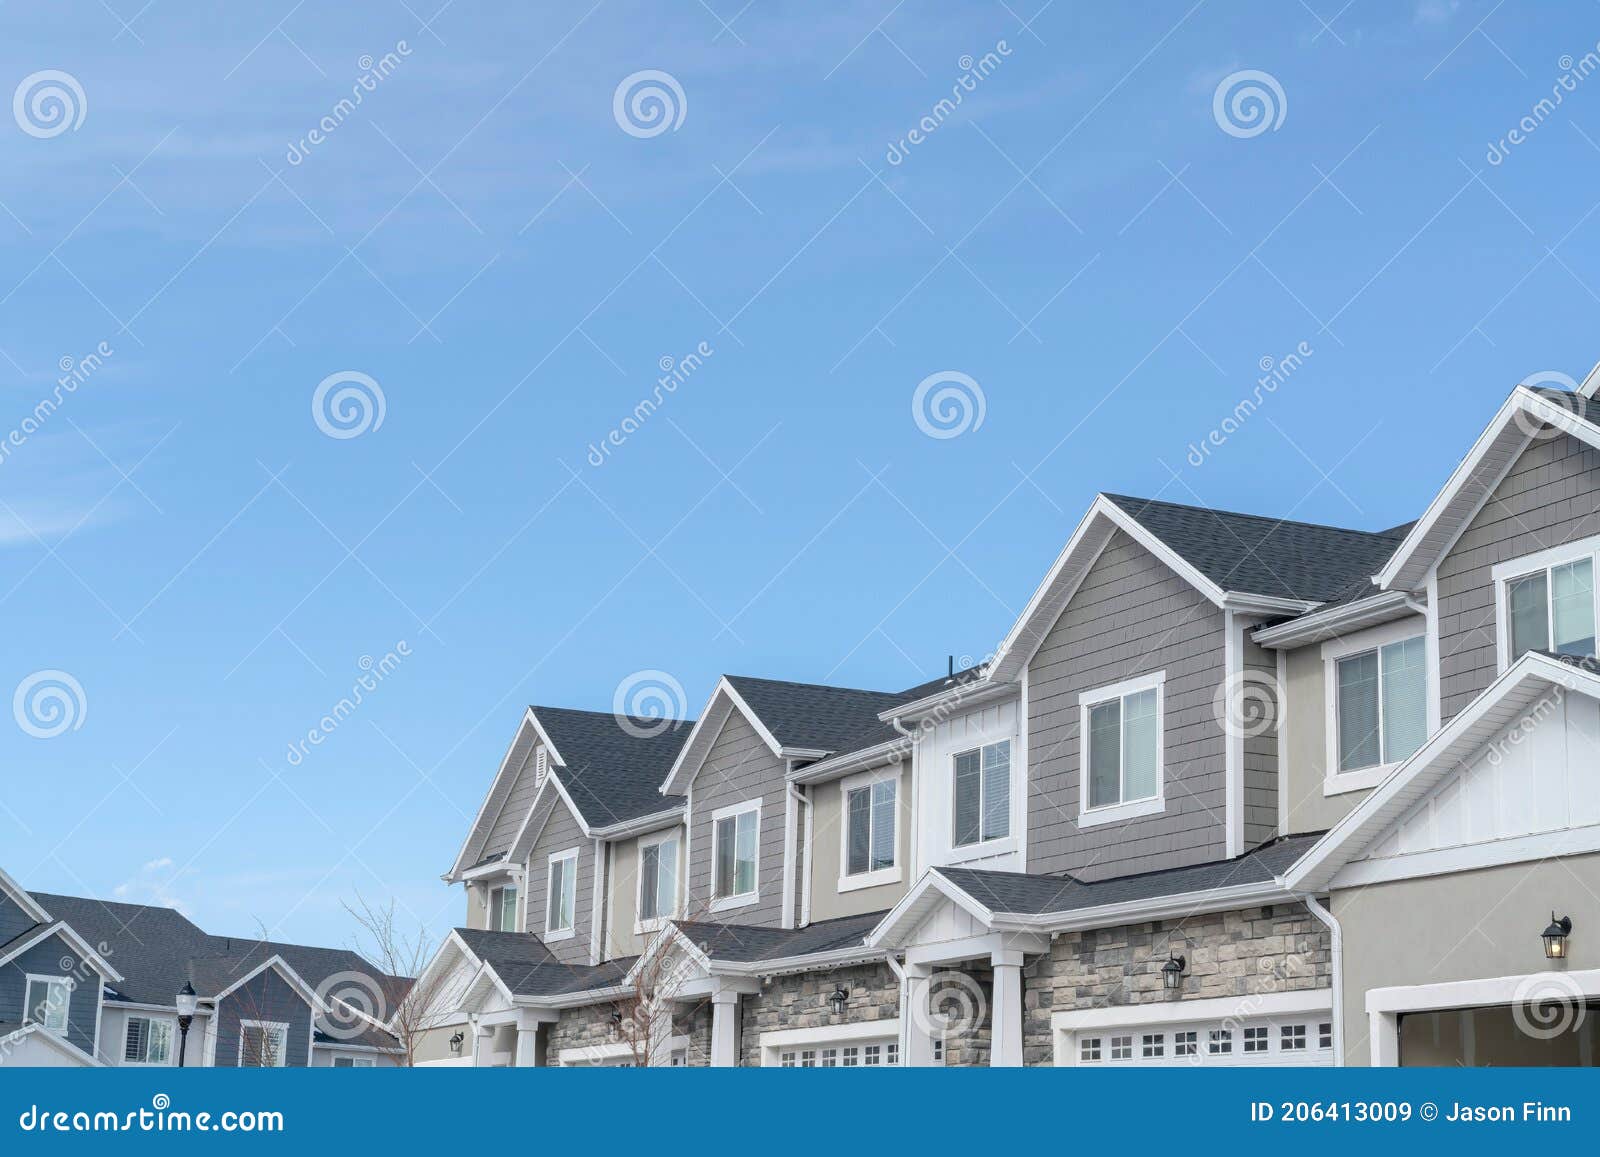 homes with gable roofs and gray exterior walls against blue sky in the suburbs